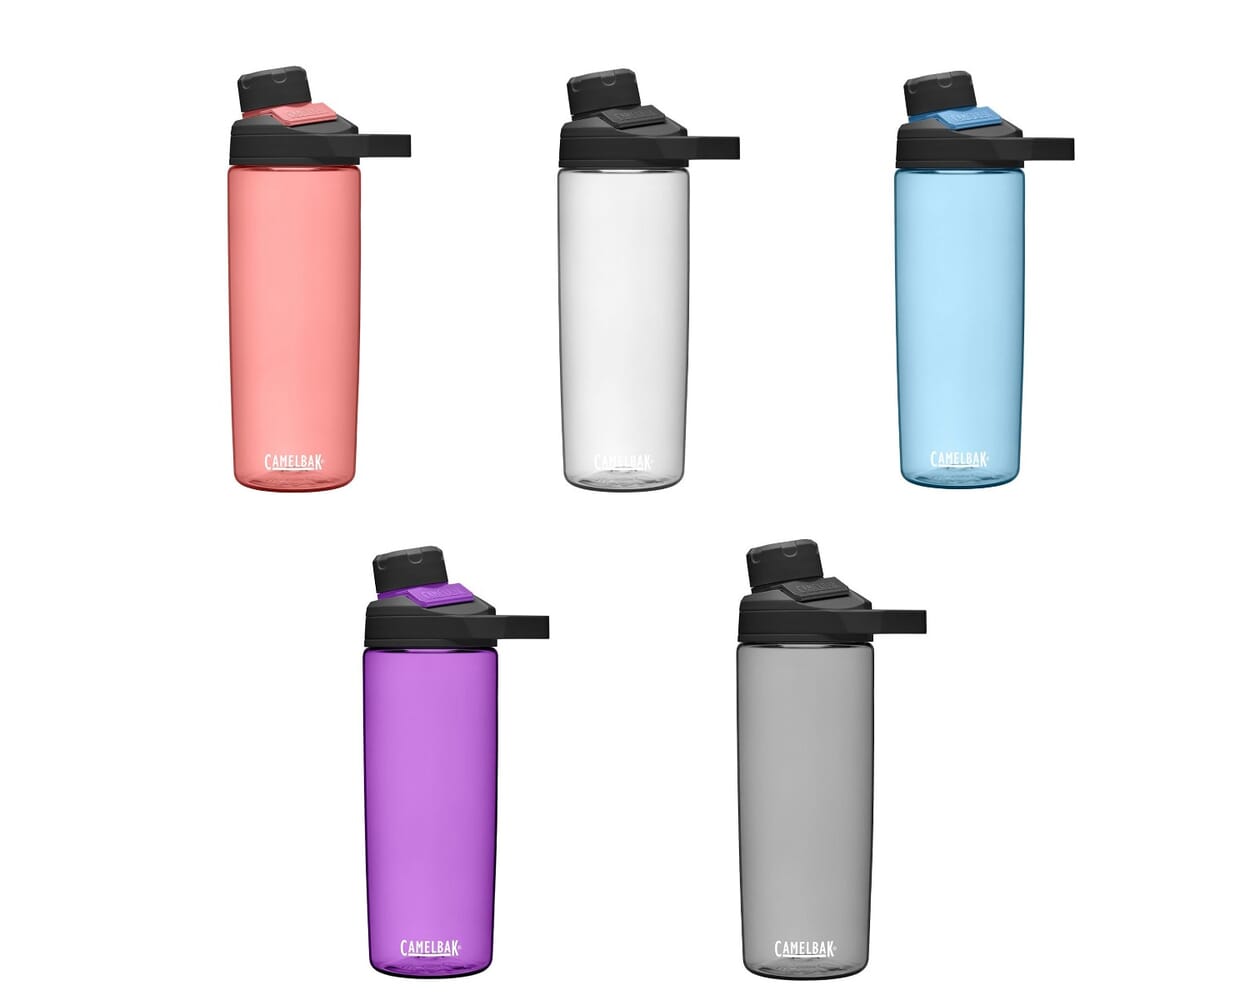 https://assets.thegreenwellystop.co.uk/media/catalog/product/c/a/camelbak-chute-mag-600ml-water-bottle.jpg?q=80&canvas.width=1250&canvas.height=1000&canvas.color=ffffff&w=1000&h=1000